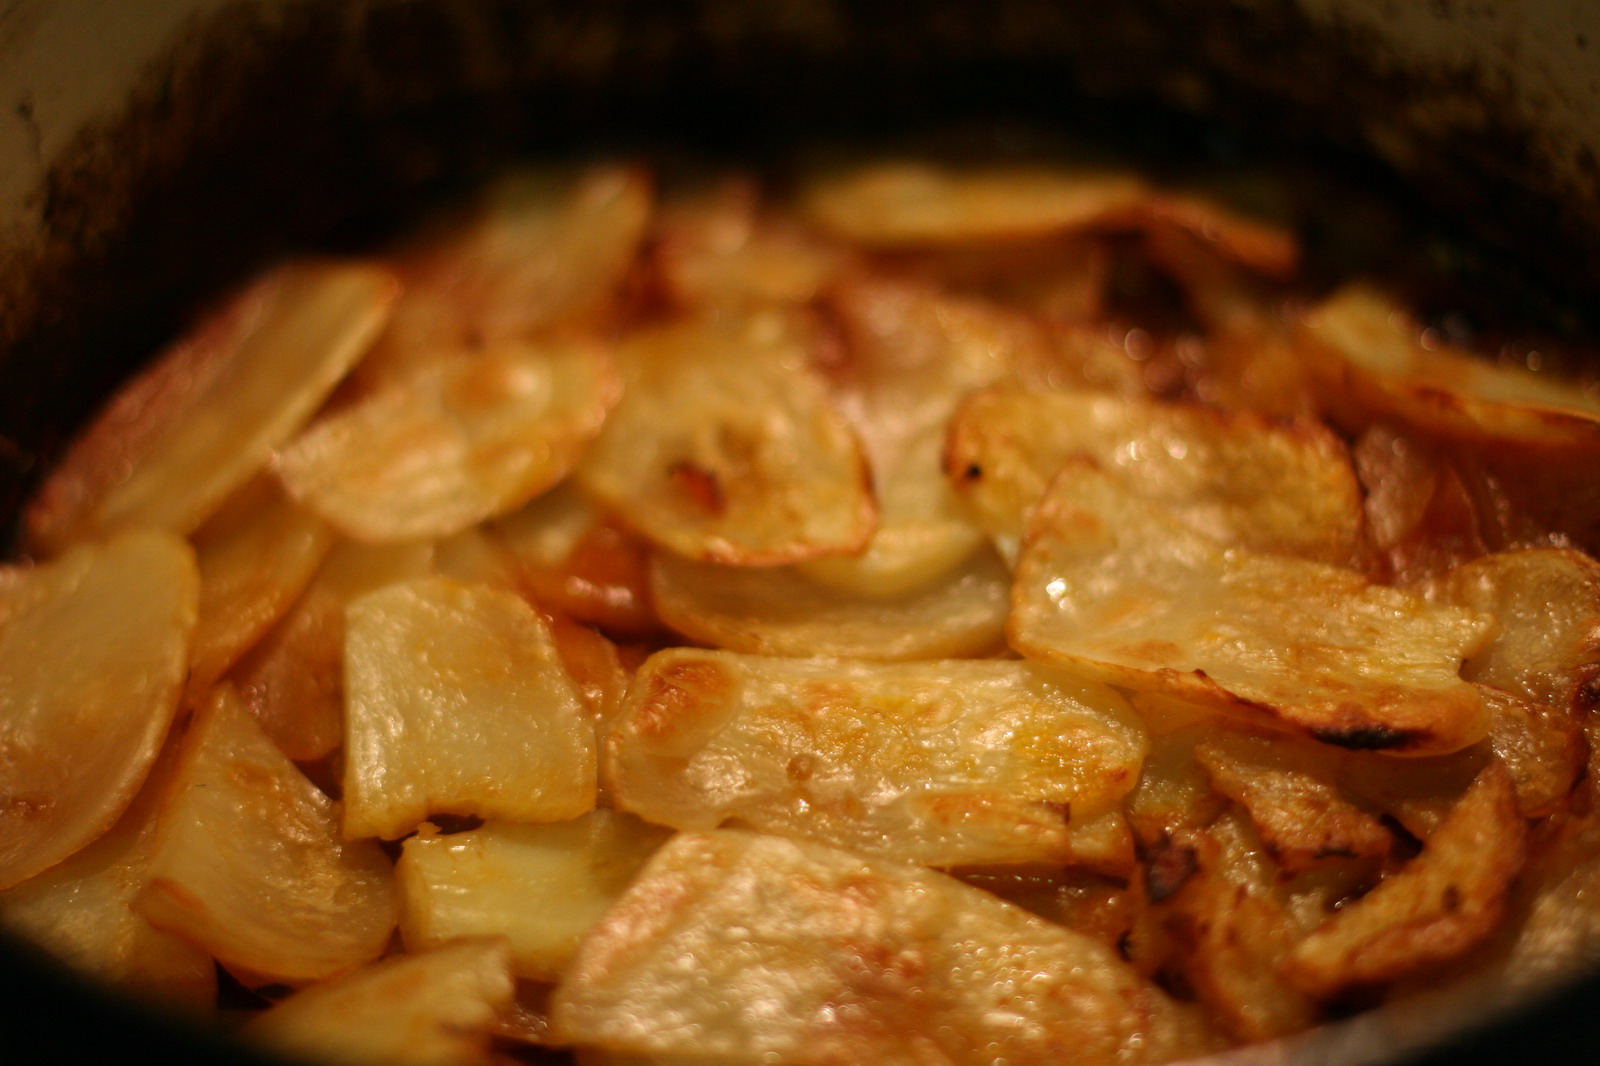 an image of food in the bowl ready to be cooked